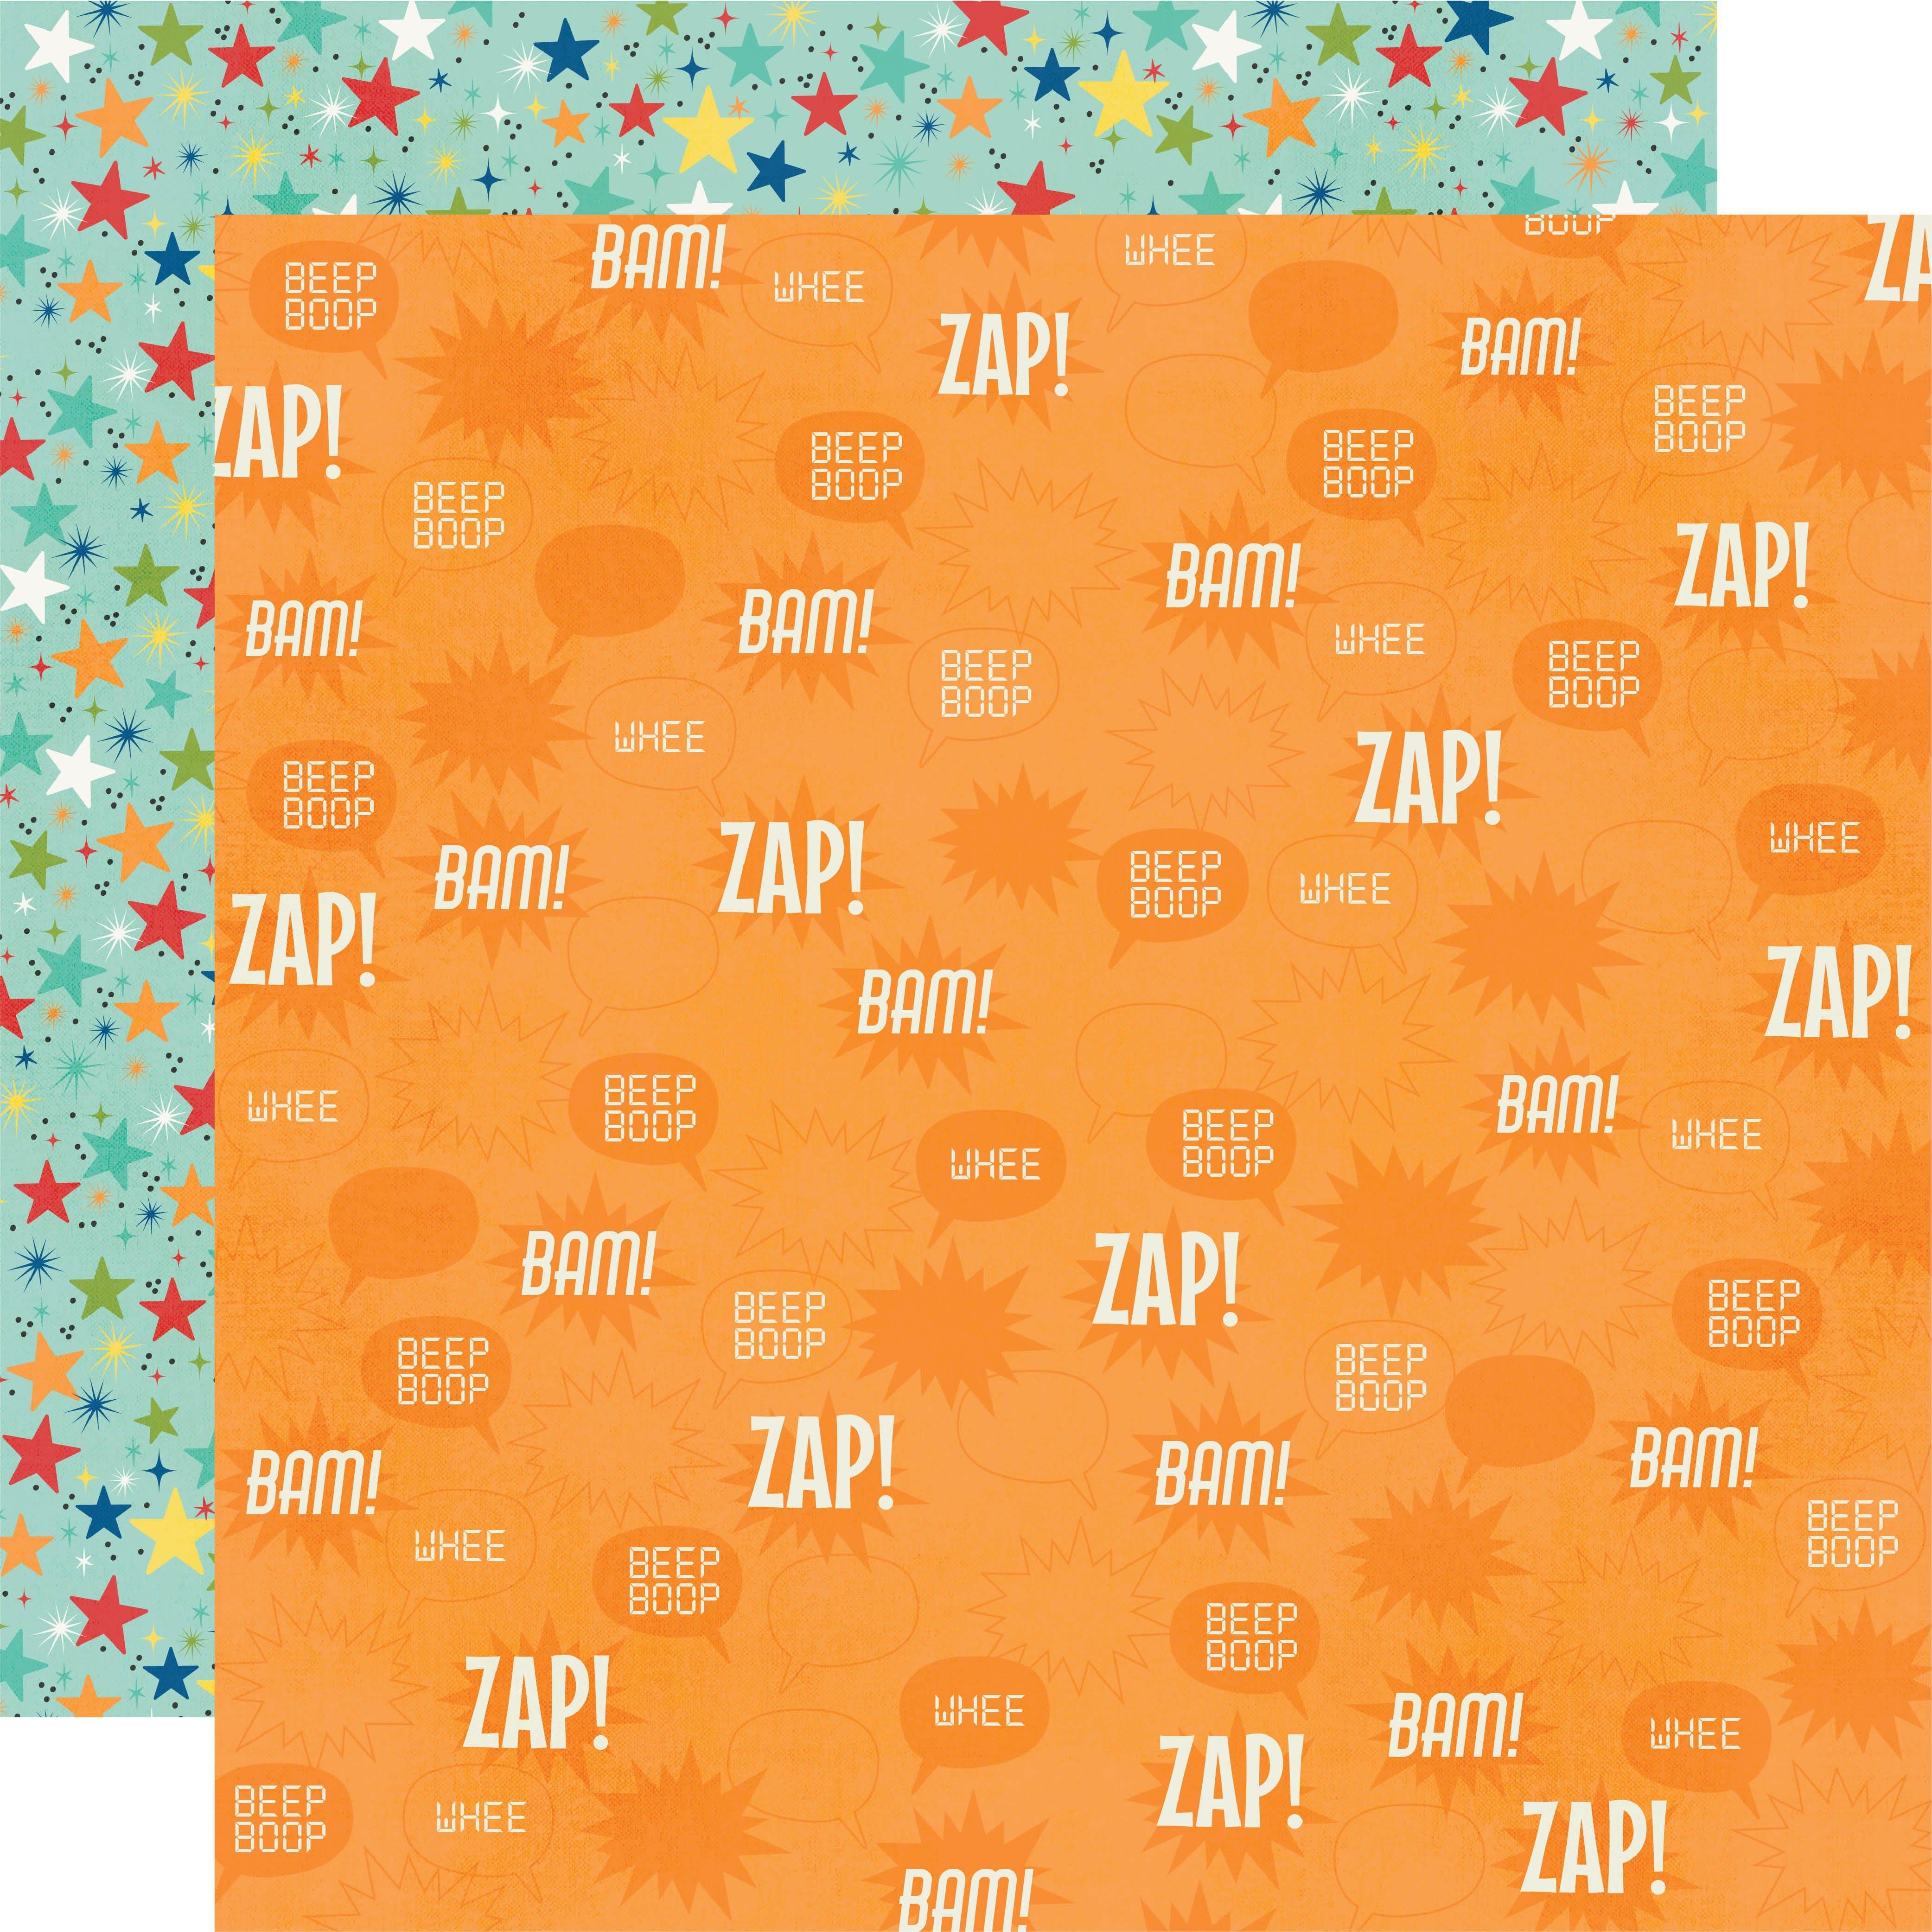 Say Cheese Tomorrow At The Park Collection Blast 'em! 12 x 12 Double-Sided Scrapbook Paper by Simple Stories - Scrapbook Supply Companies